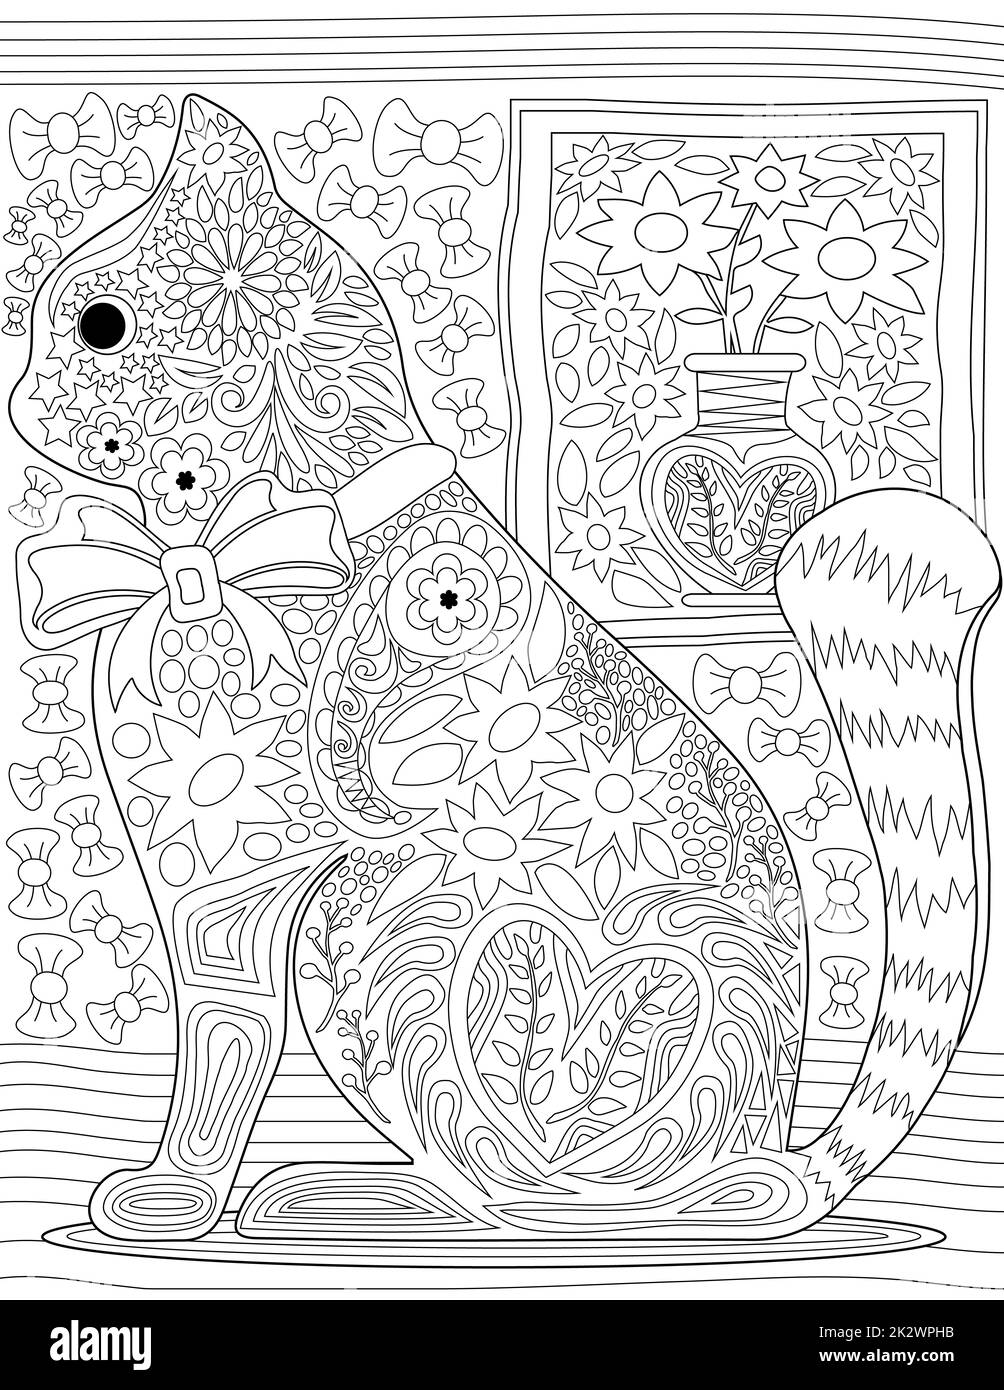 Abstract vector line drawing house cat wearing bow sitting floor floral picture background. Digital lineart image feline animal having ribbon collar flower patterns. Stock Photo